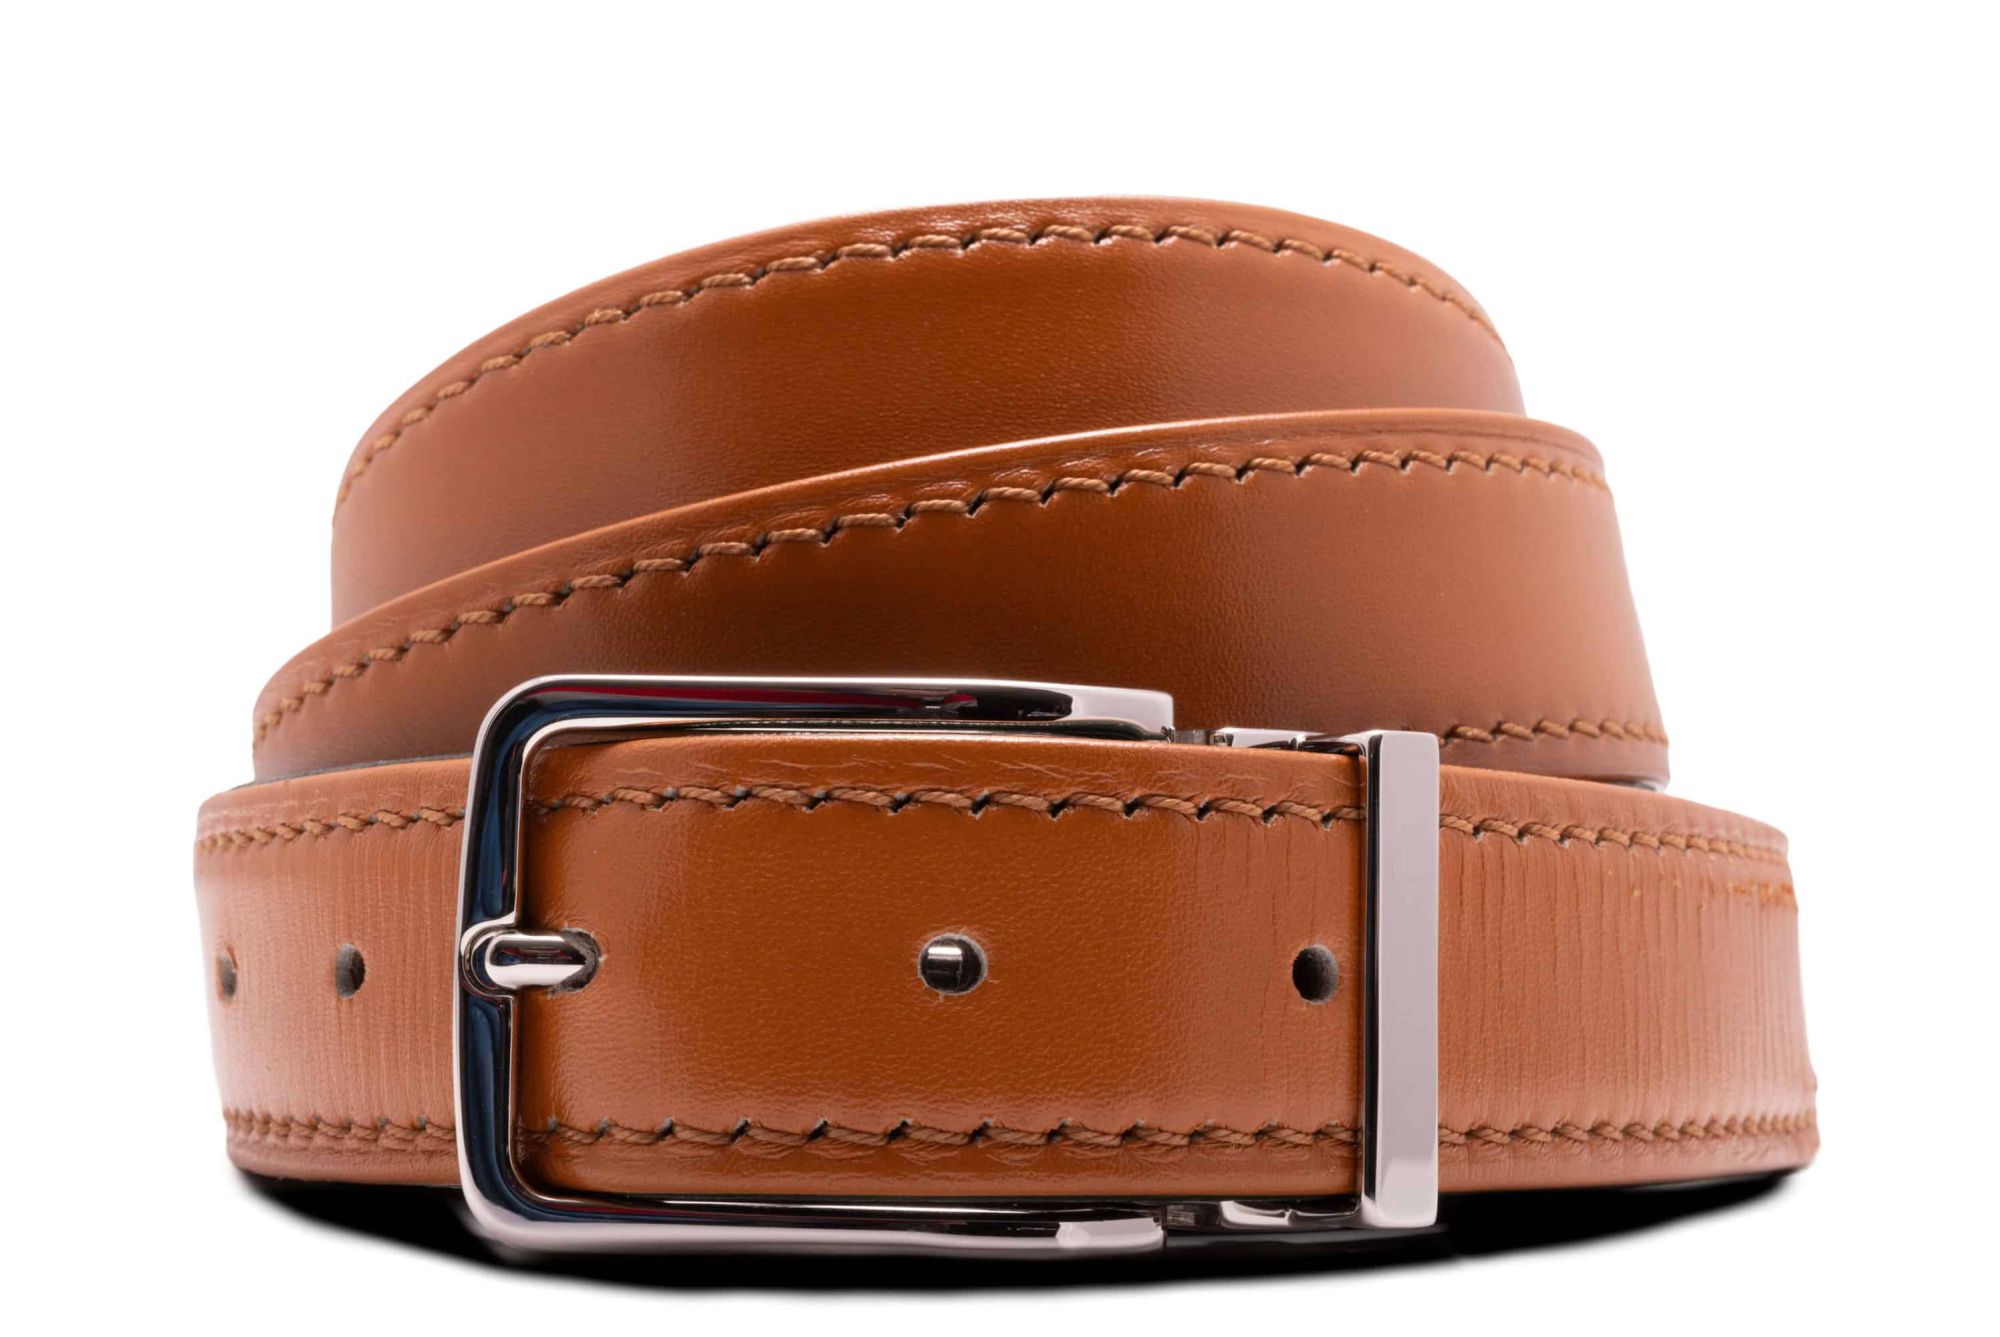 Kollega Tick bord Tan Cognac Brown Calf Leather Belt Handmade, Aniline Dyed, Saffiano Lining,  Folded Edges by Fort Belvedere